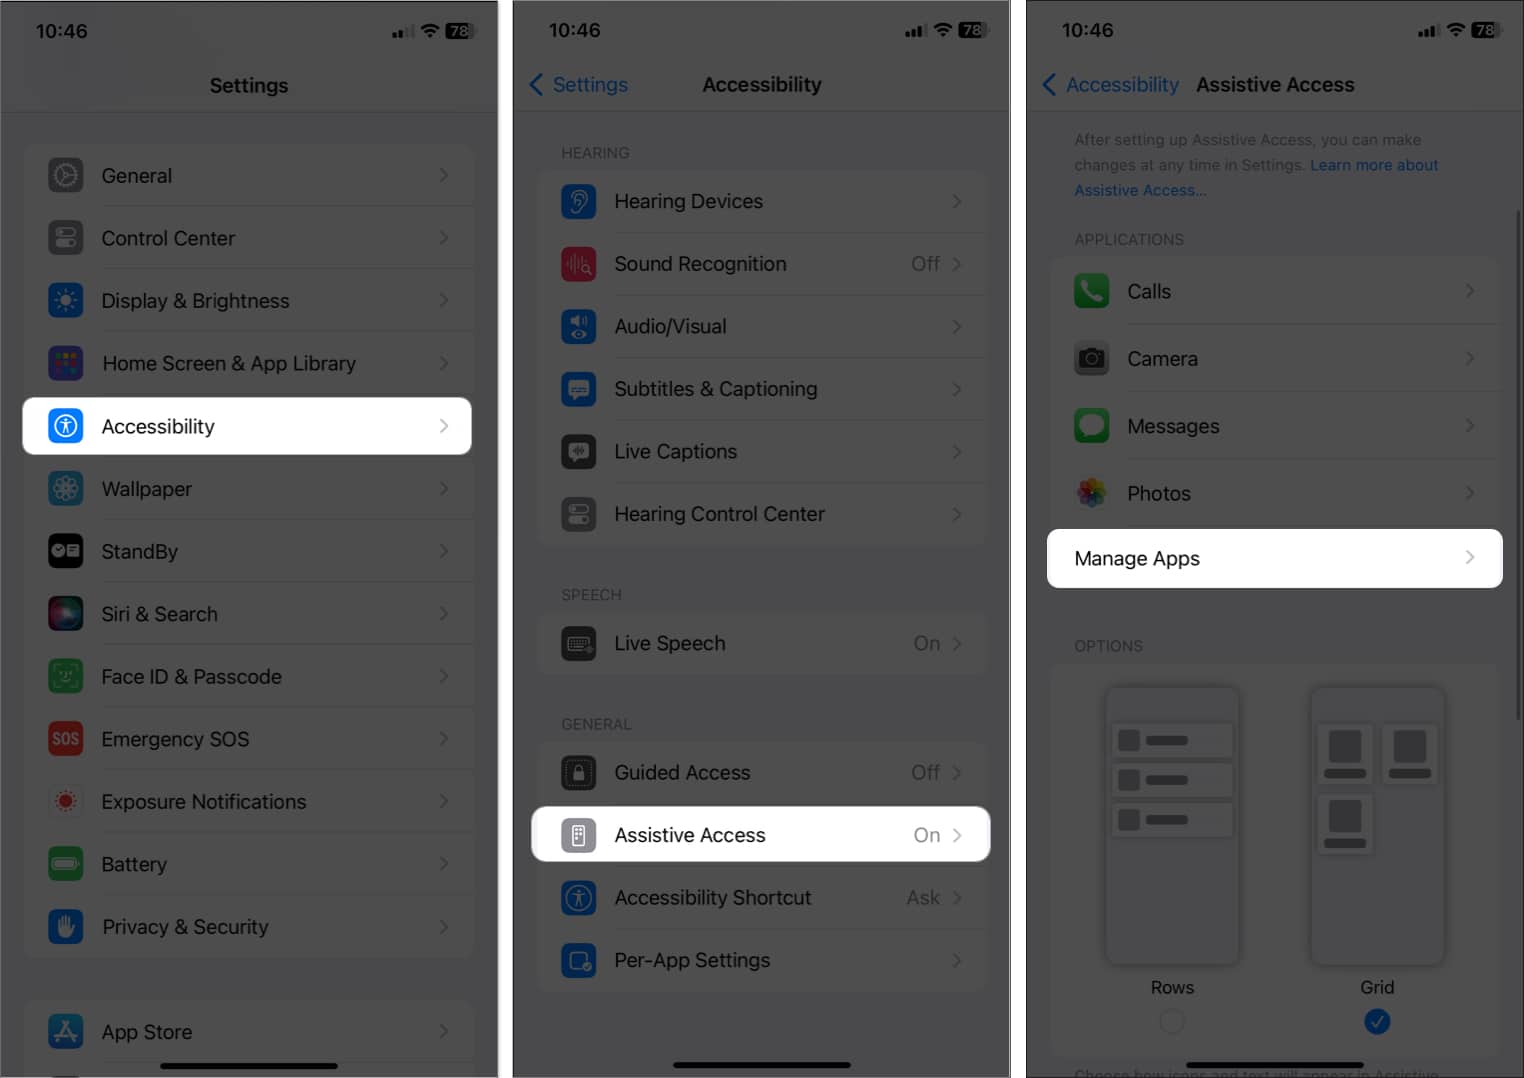 tap accessibility, assistive touch, manage apps in settings